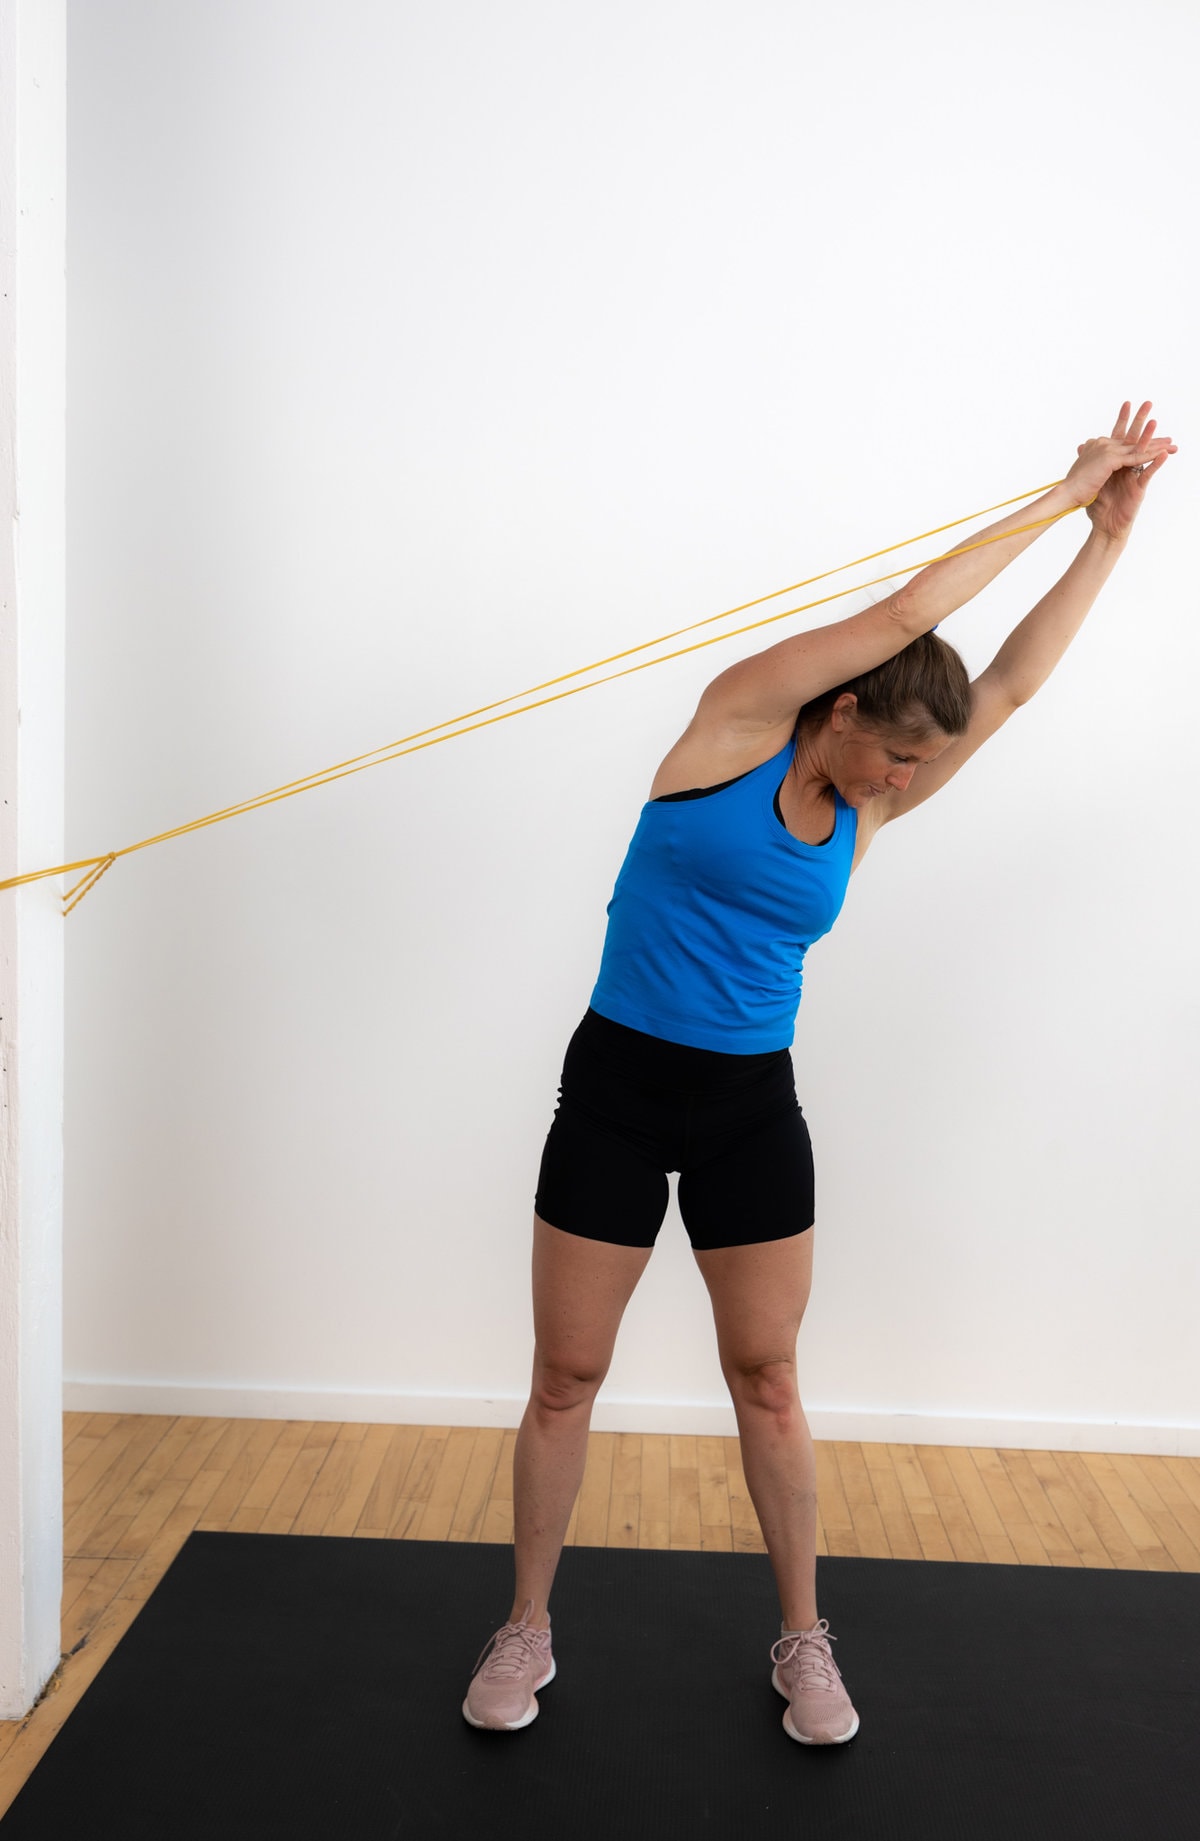 10 Resistance Band Exercises for Pregnancy and Beyond